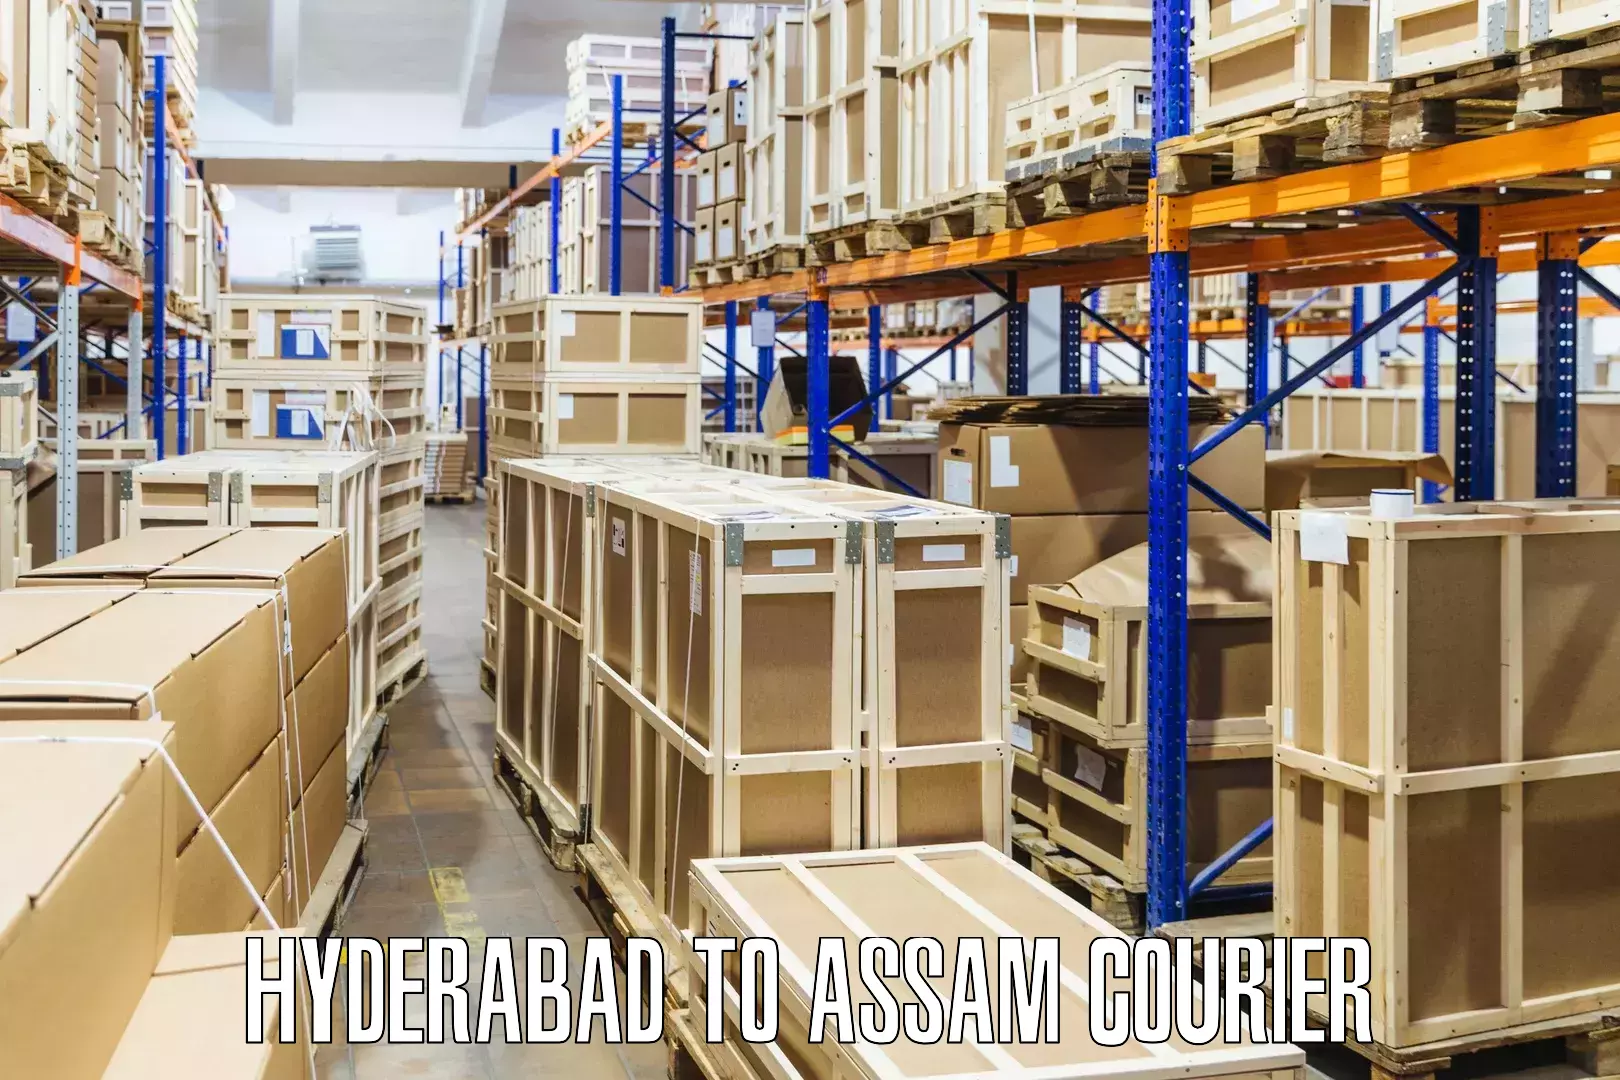 Comprehensive shipping network Hyderabad to Assam